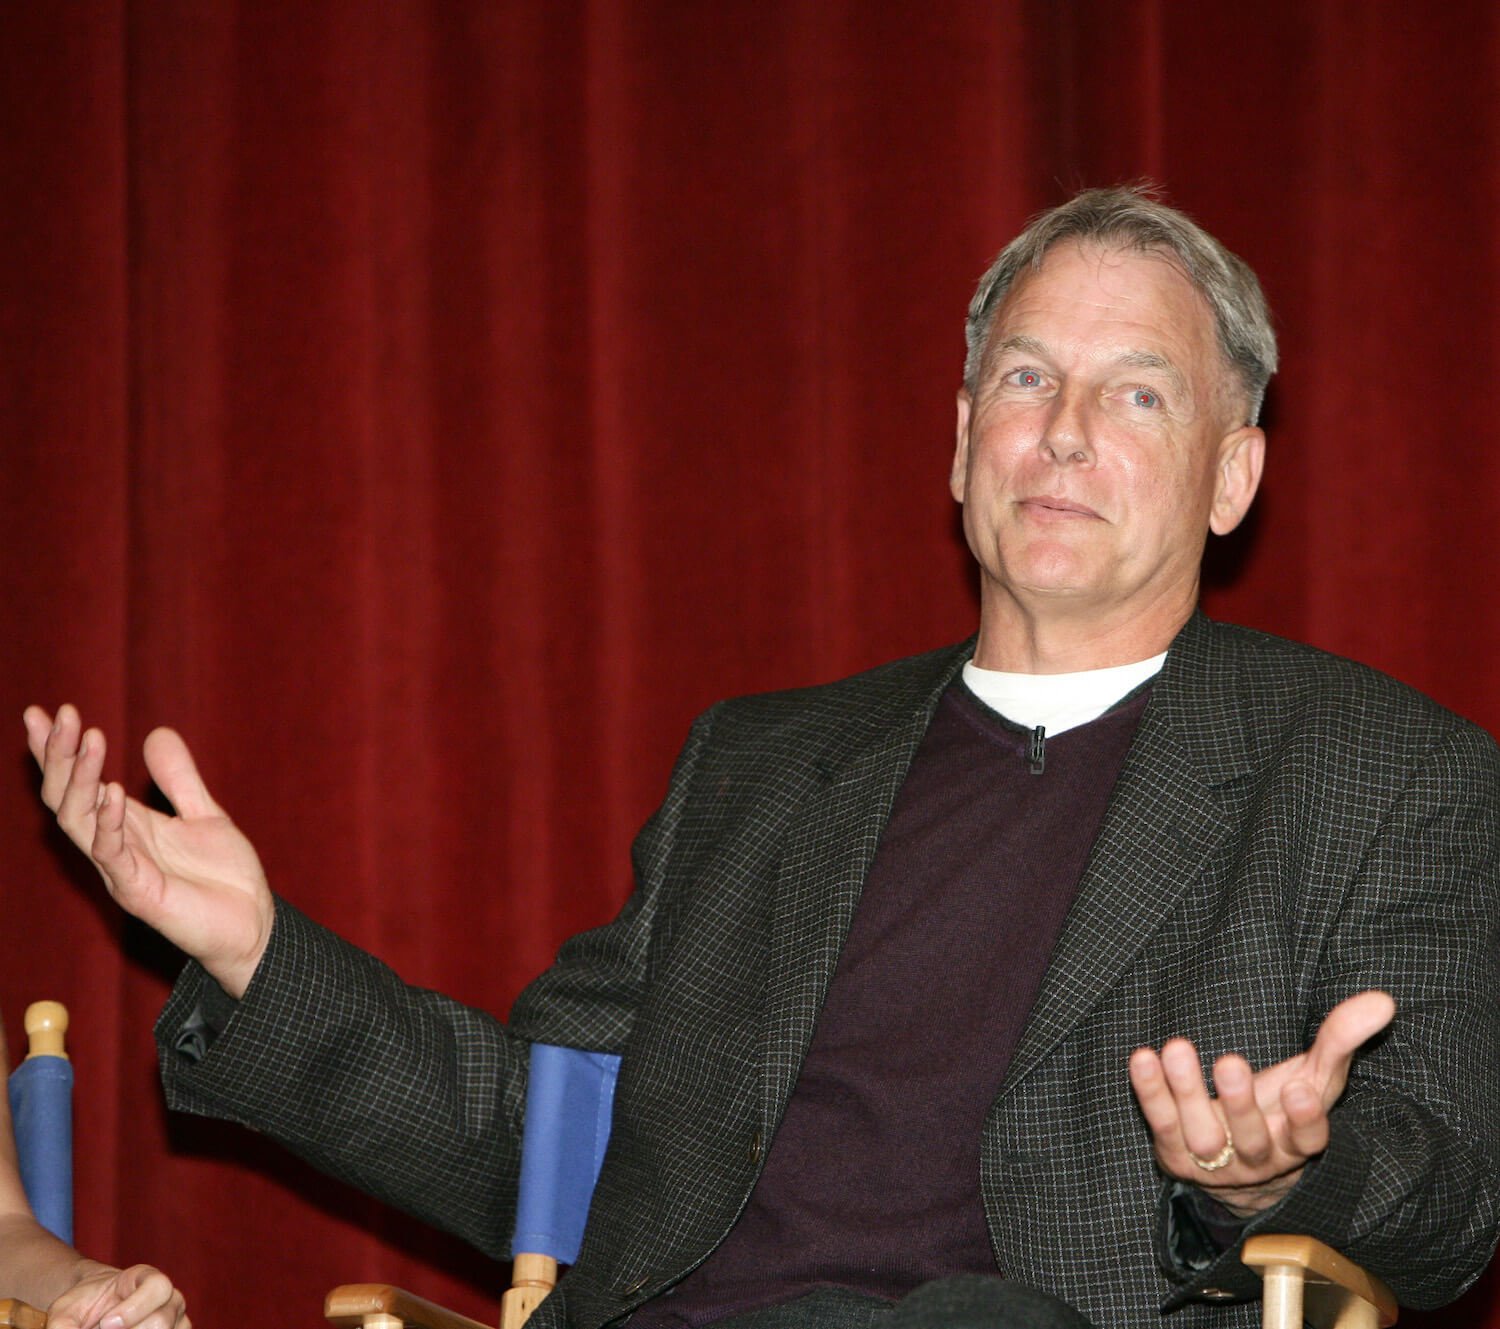 'NCIS' and 'The West Wing' star Mark Harmon sitting down with his hands up by his sides